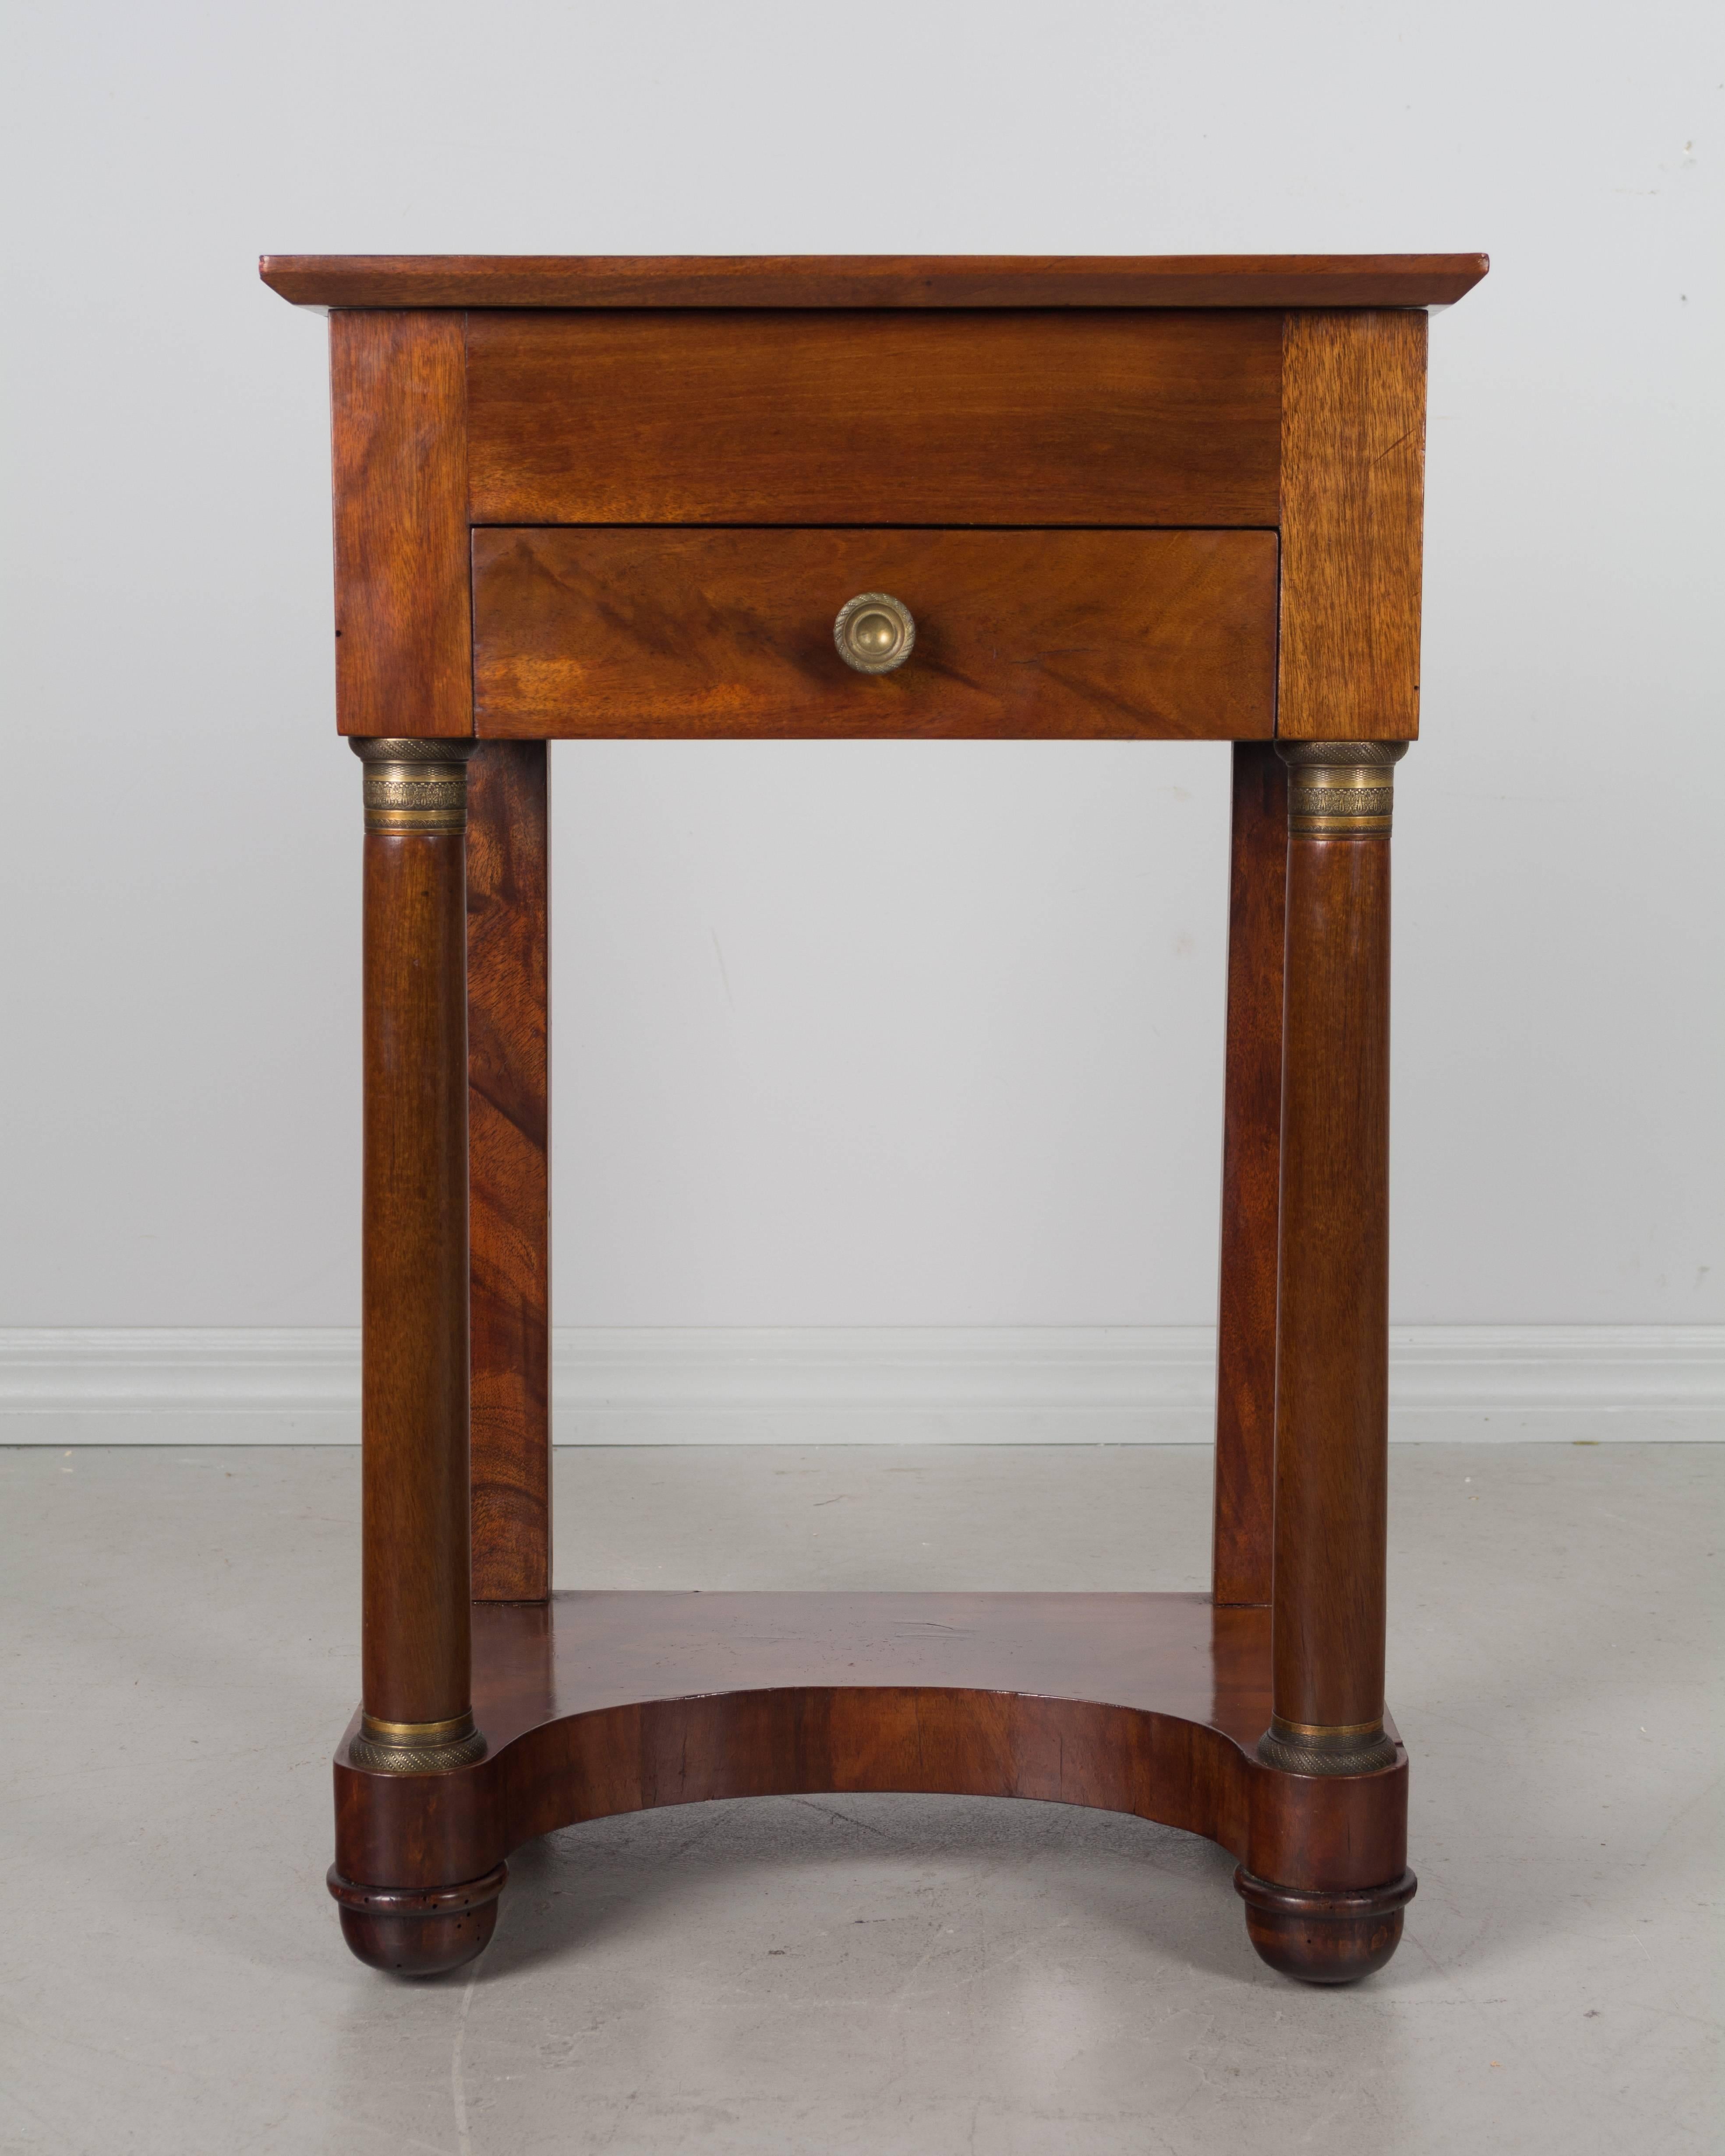 An early 19th century, French empire style mahogany side table or nightstand. Dovetailed drawer beneath a hinged top opening to reveal a mirror and small compartments. Front columns with bronze decoration. French polish finish Old repair to back